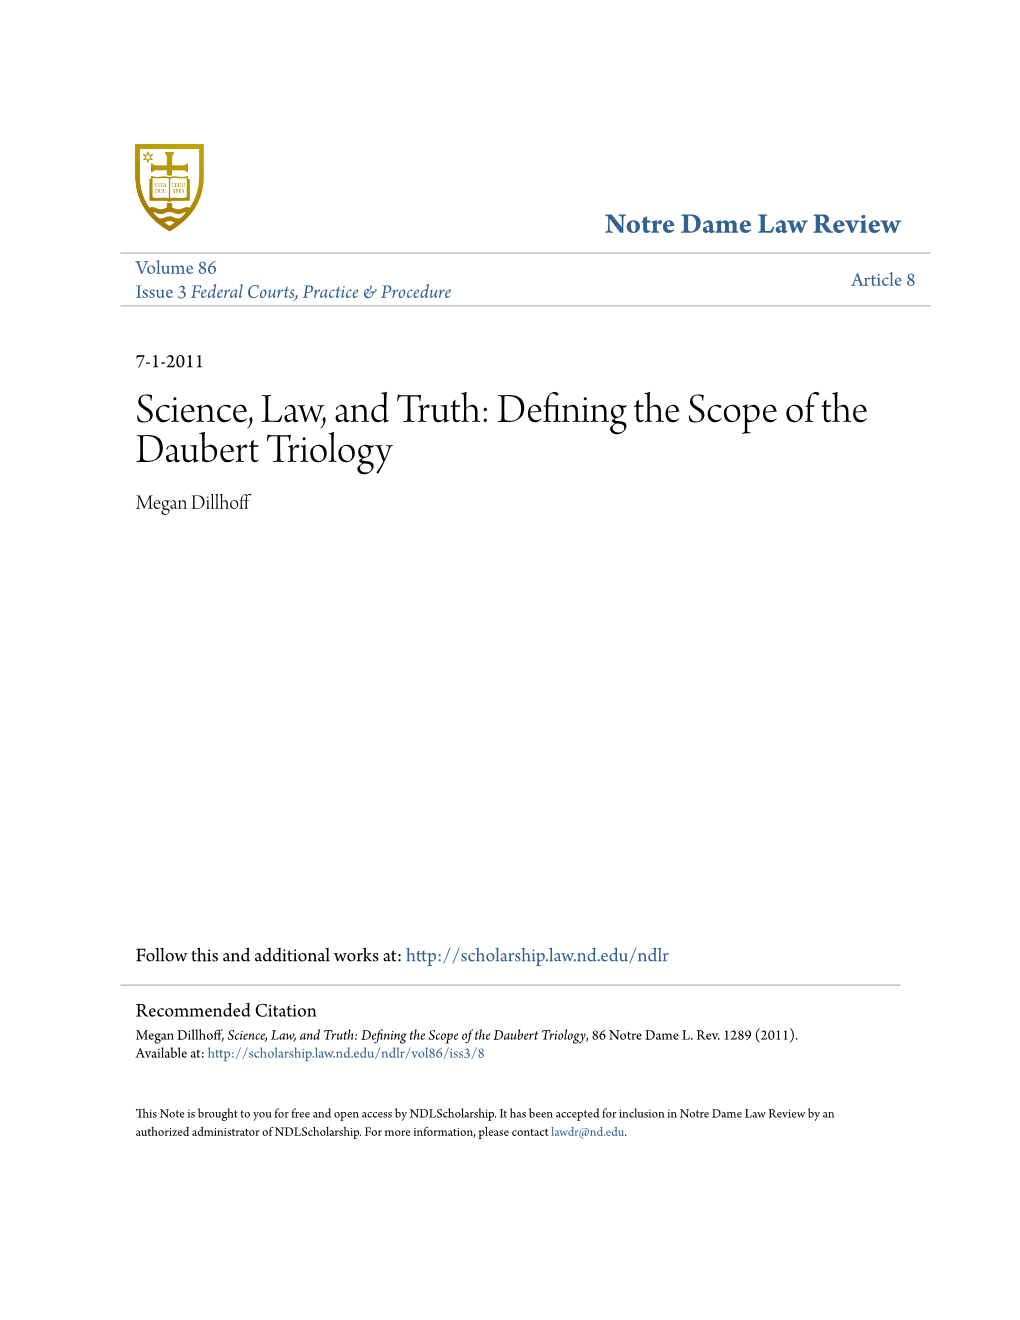 Science, Law, and Truth: Defining the Scope of the Daubert Triology Megan Dillhoff